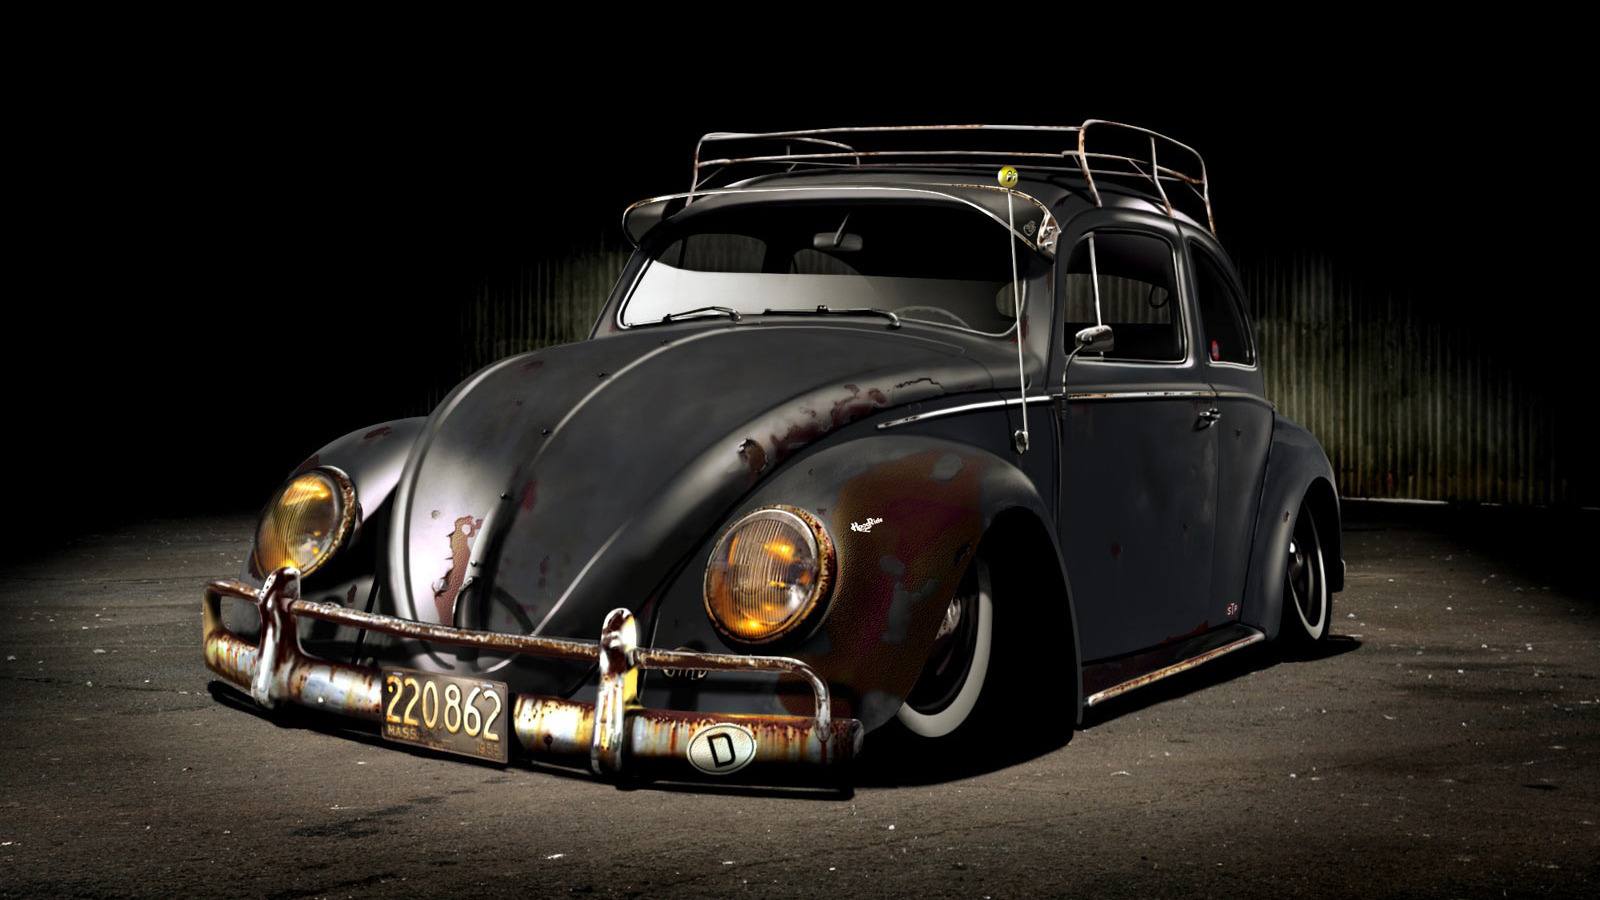  Wallpaper on Old Cars Bug Vehicles Rat Rod Car Beatle Hd Wallpaper   Insects   Bugs